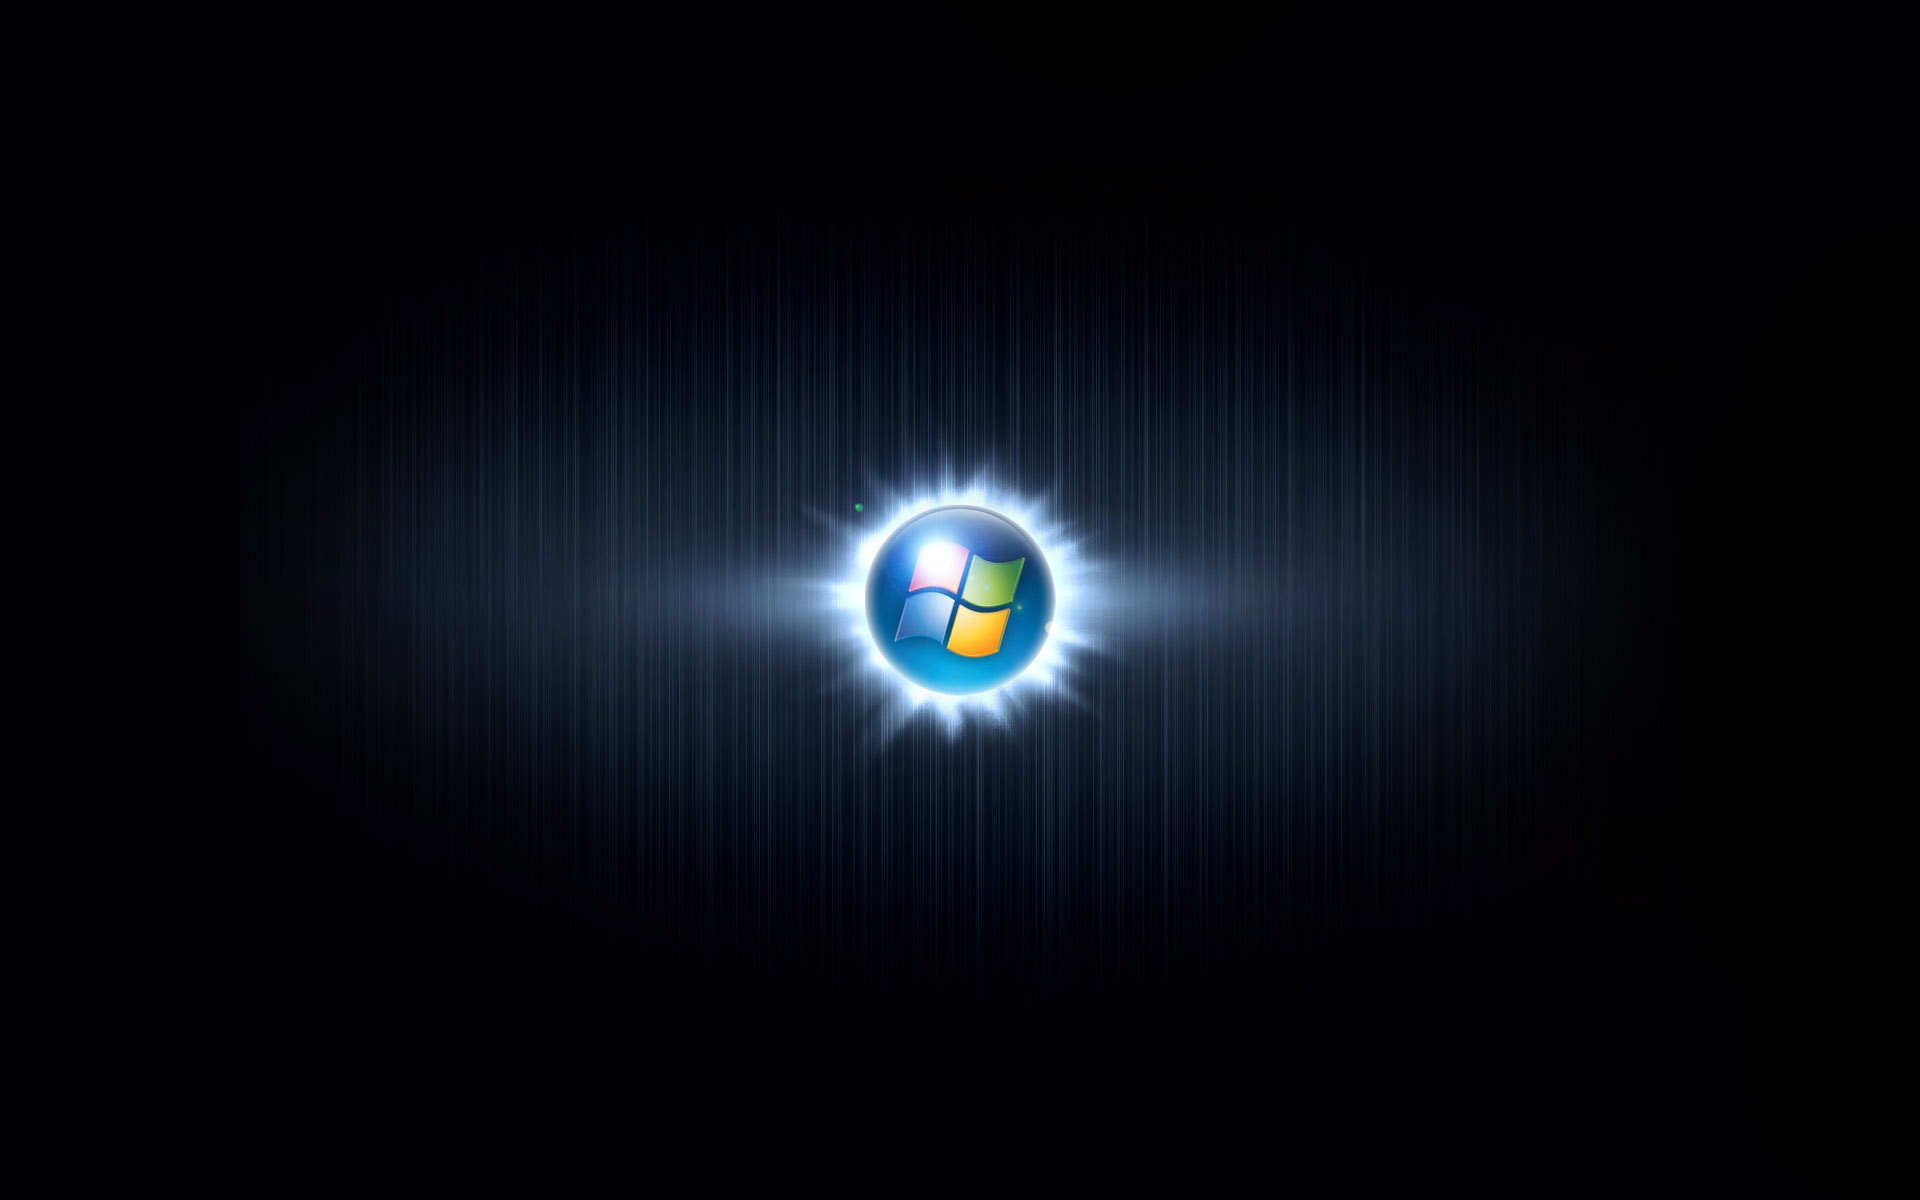 Wallpapers hd for windows